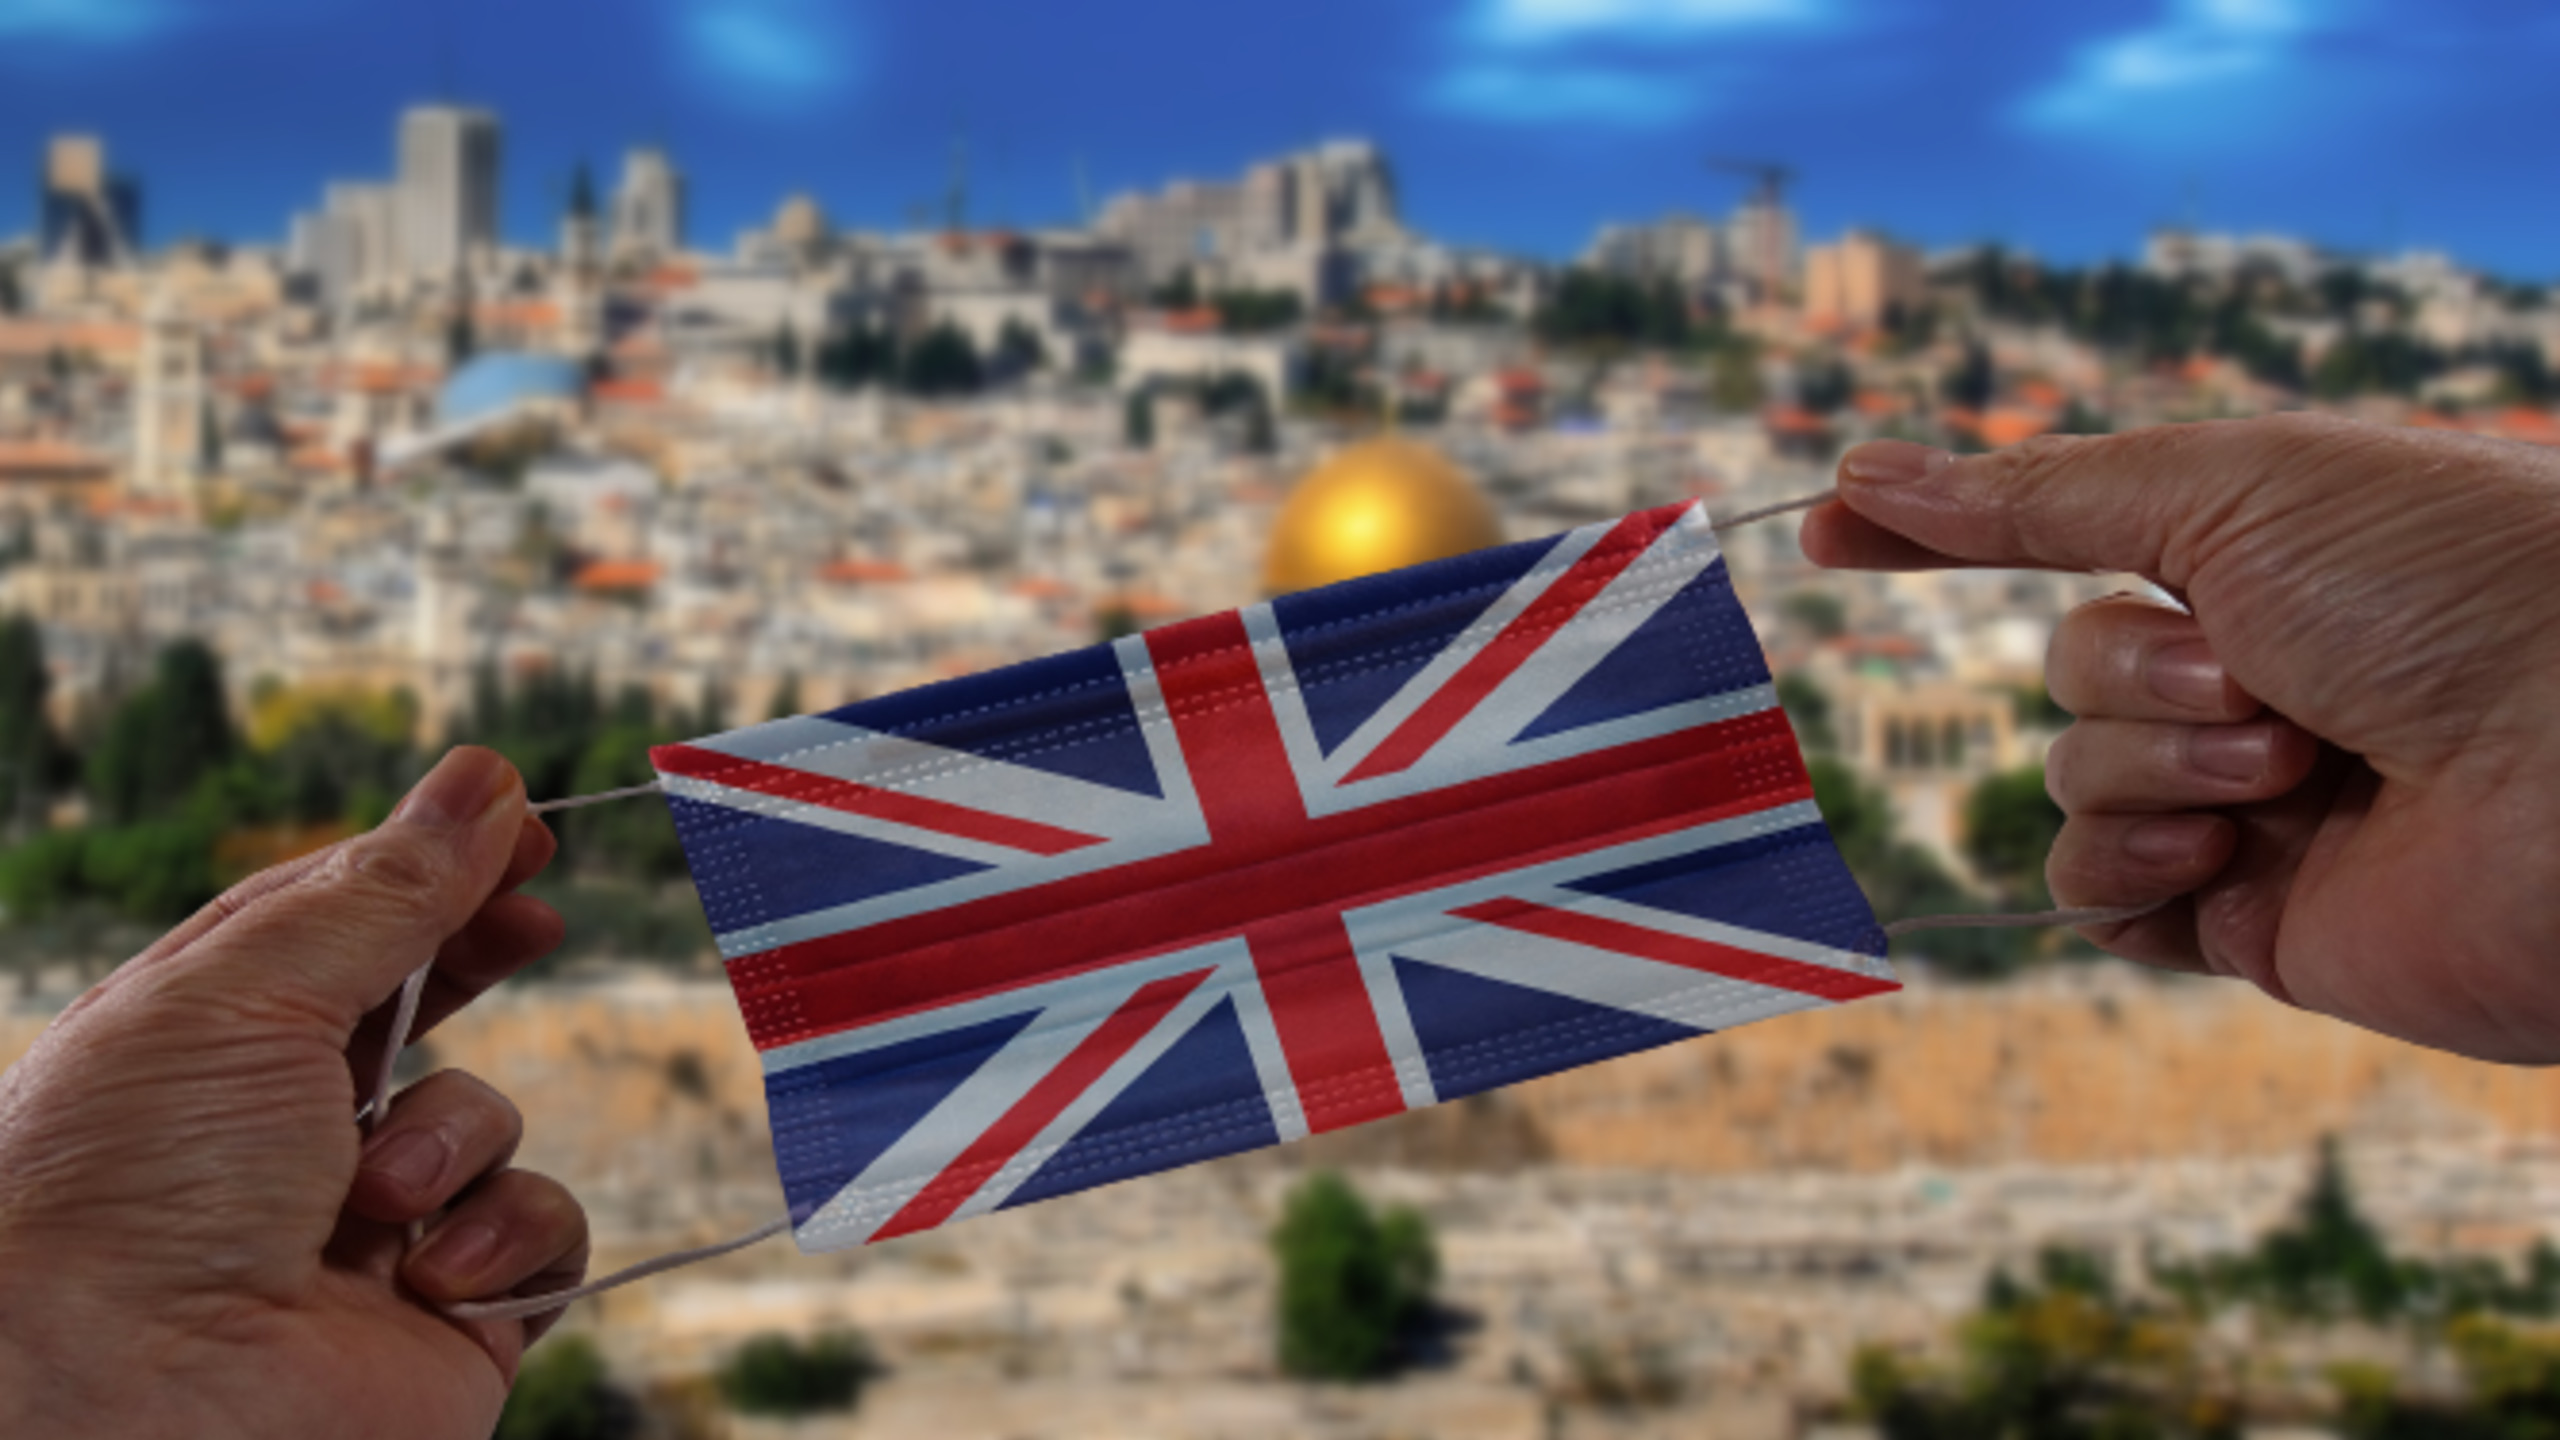 British Student Group Participants Develop COVID in Israel